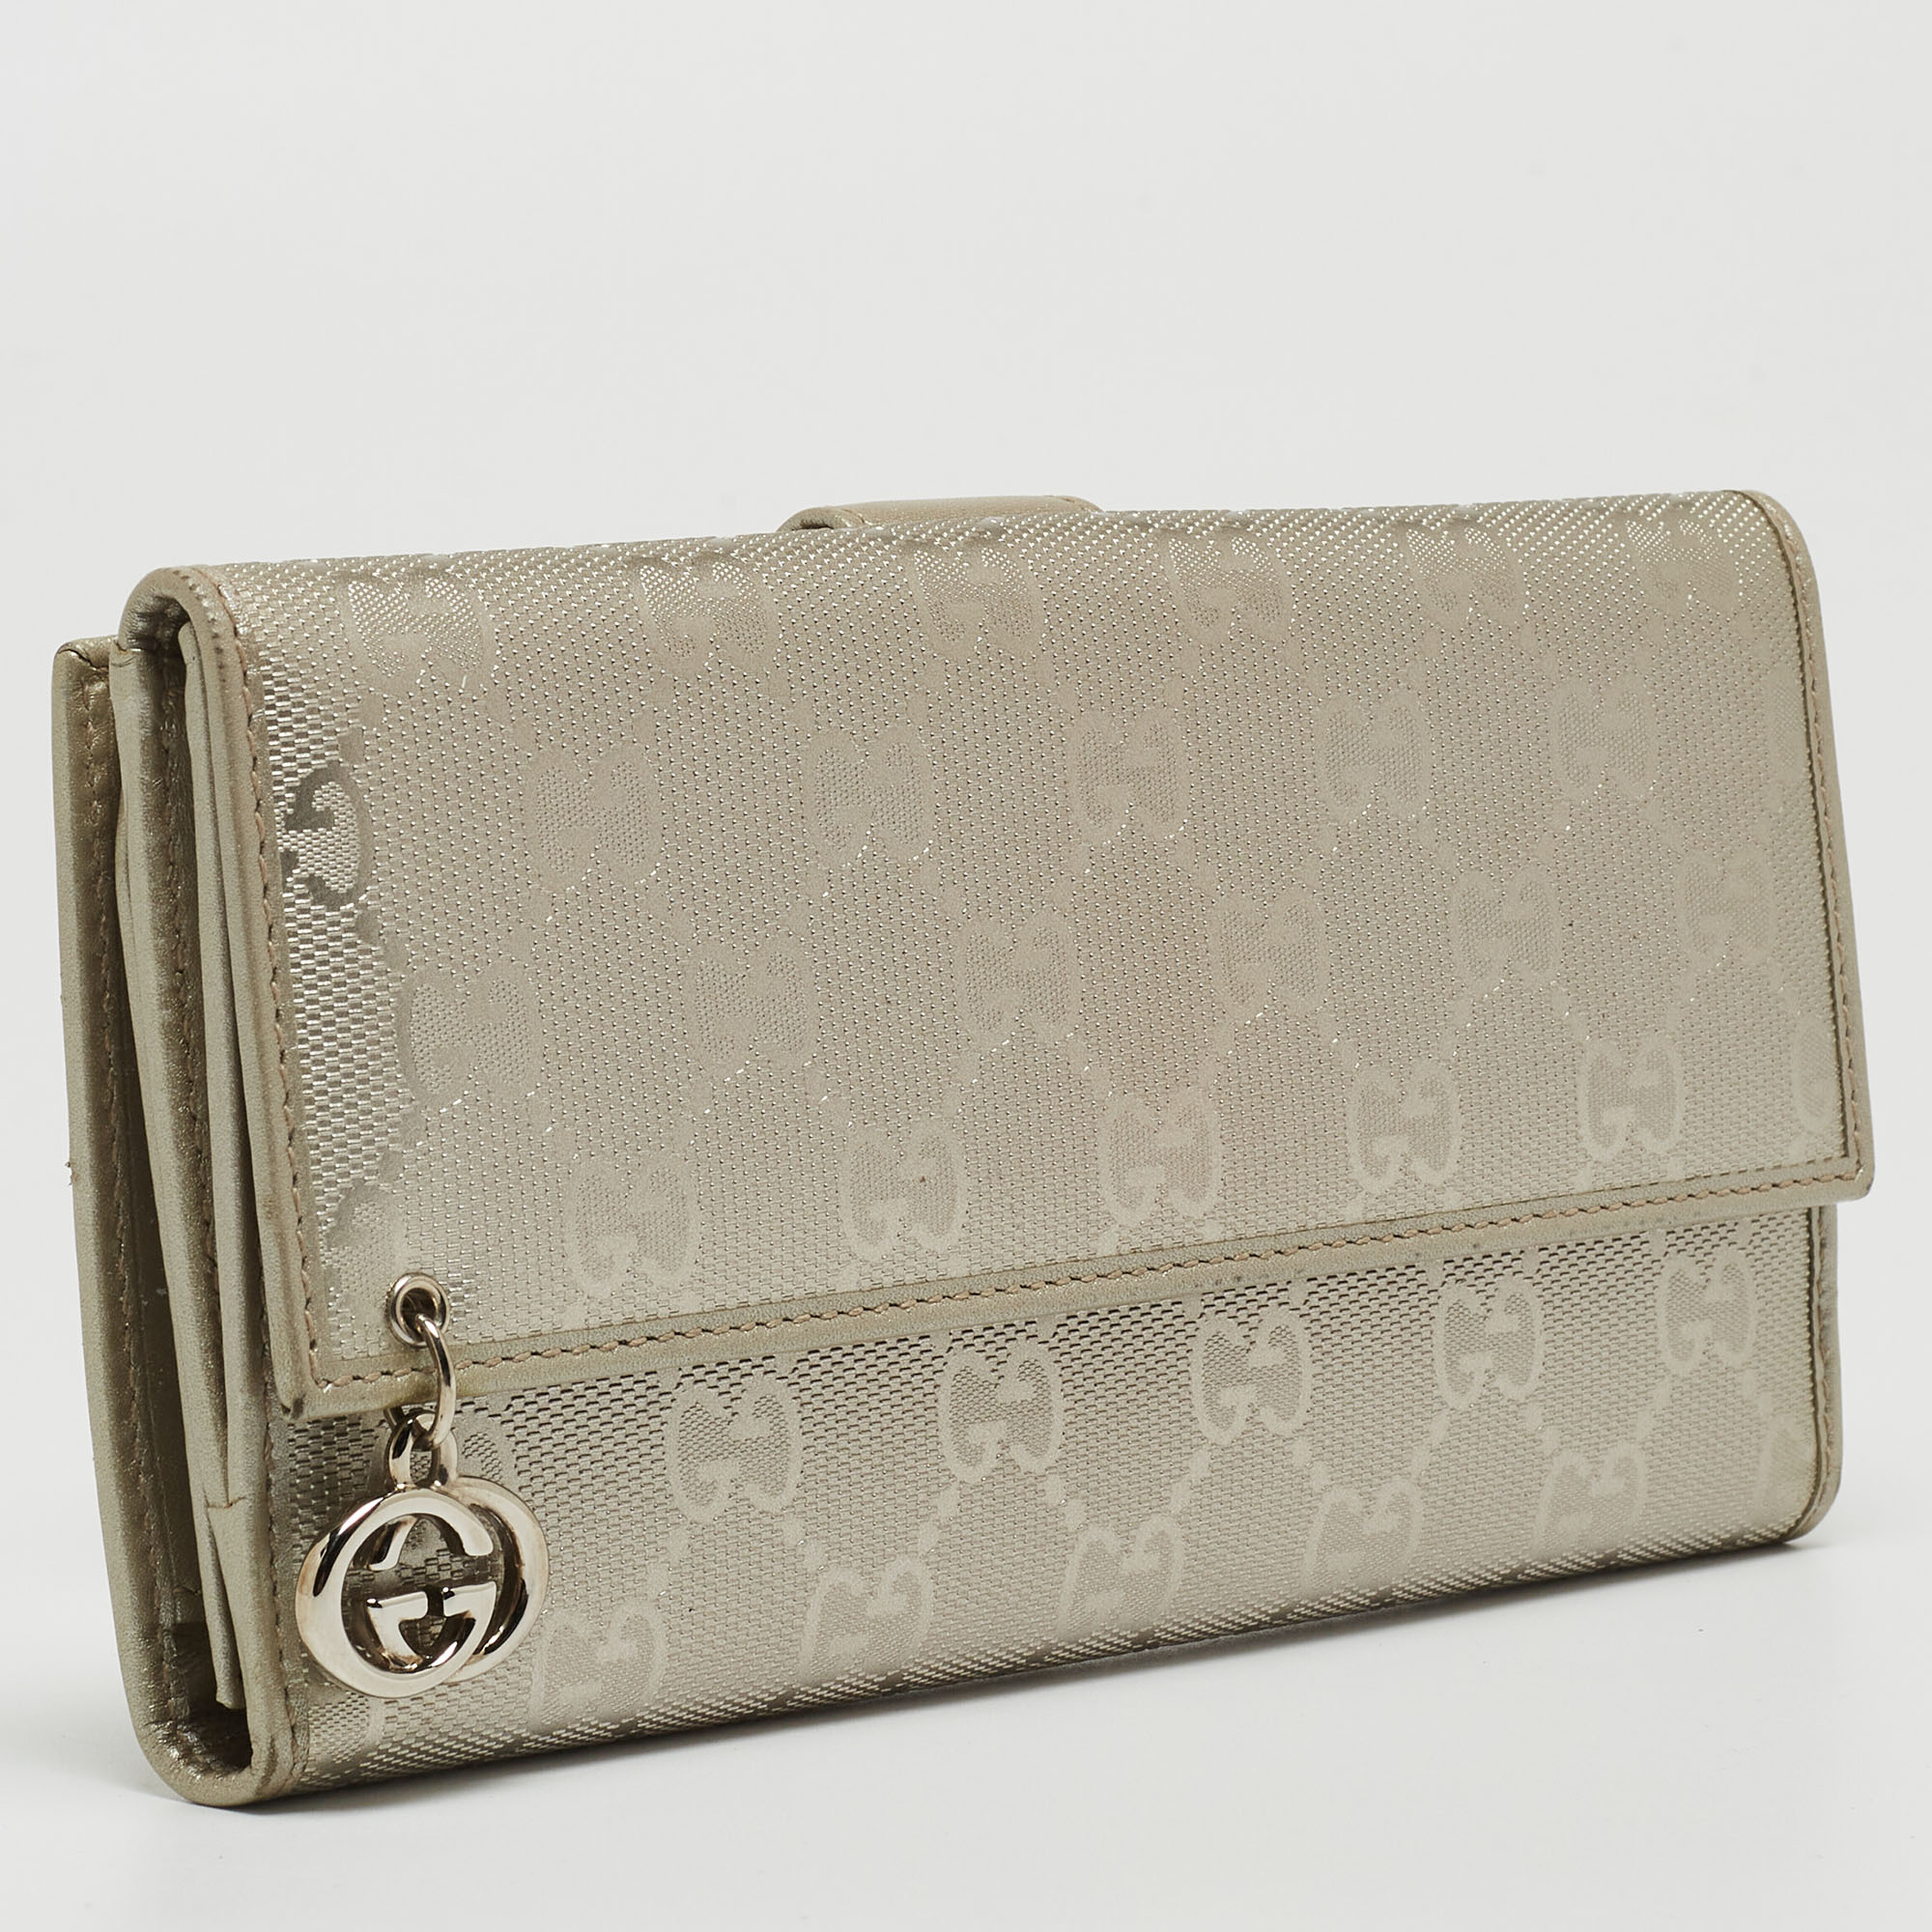 Gucci Metallic GG Imprime And Leather Interlocking G Continental Wallet